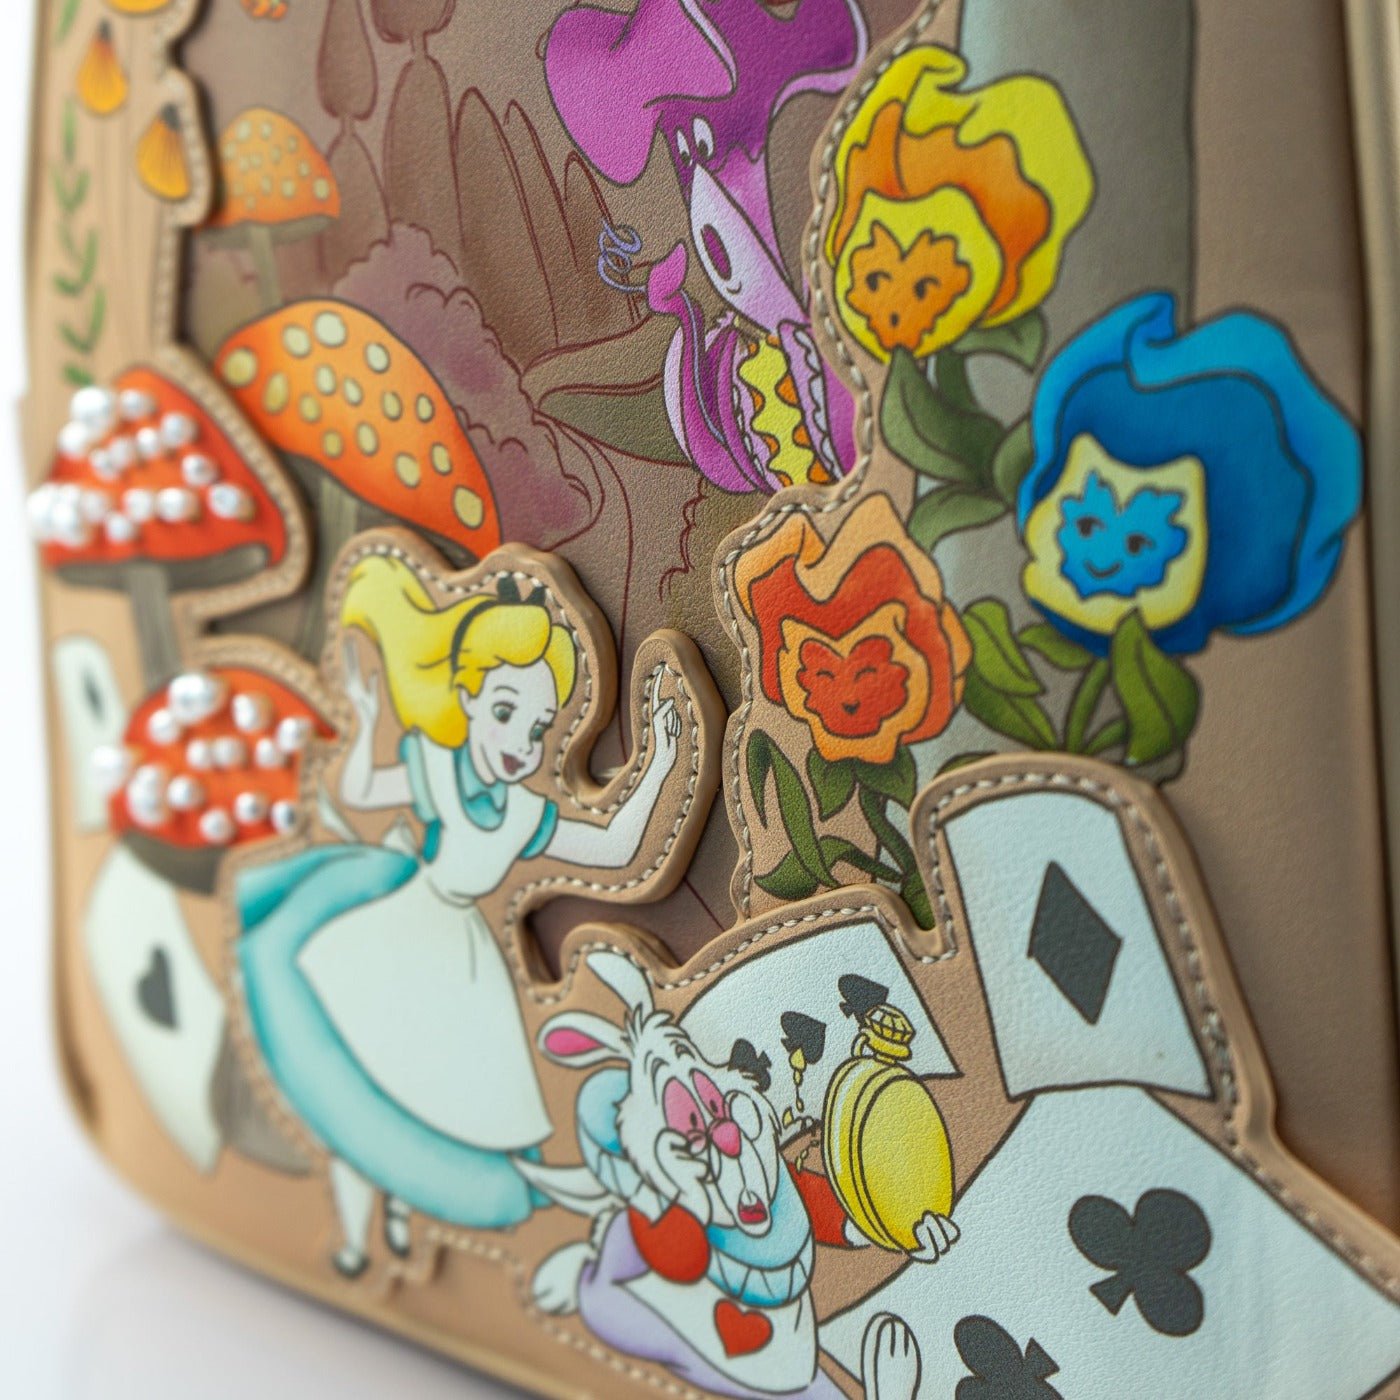 Loungefly x Disney Alice in Wonderland Forest Friends Mini Backpack - GeekCore